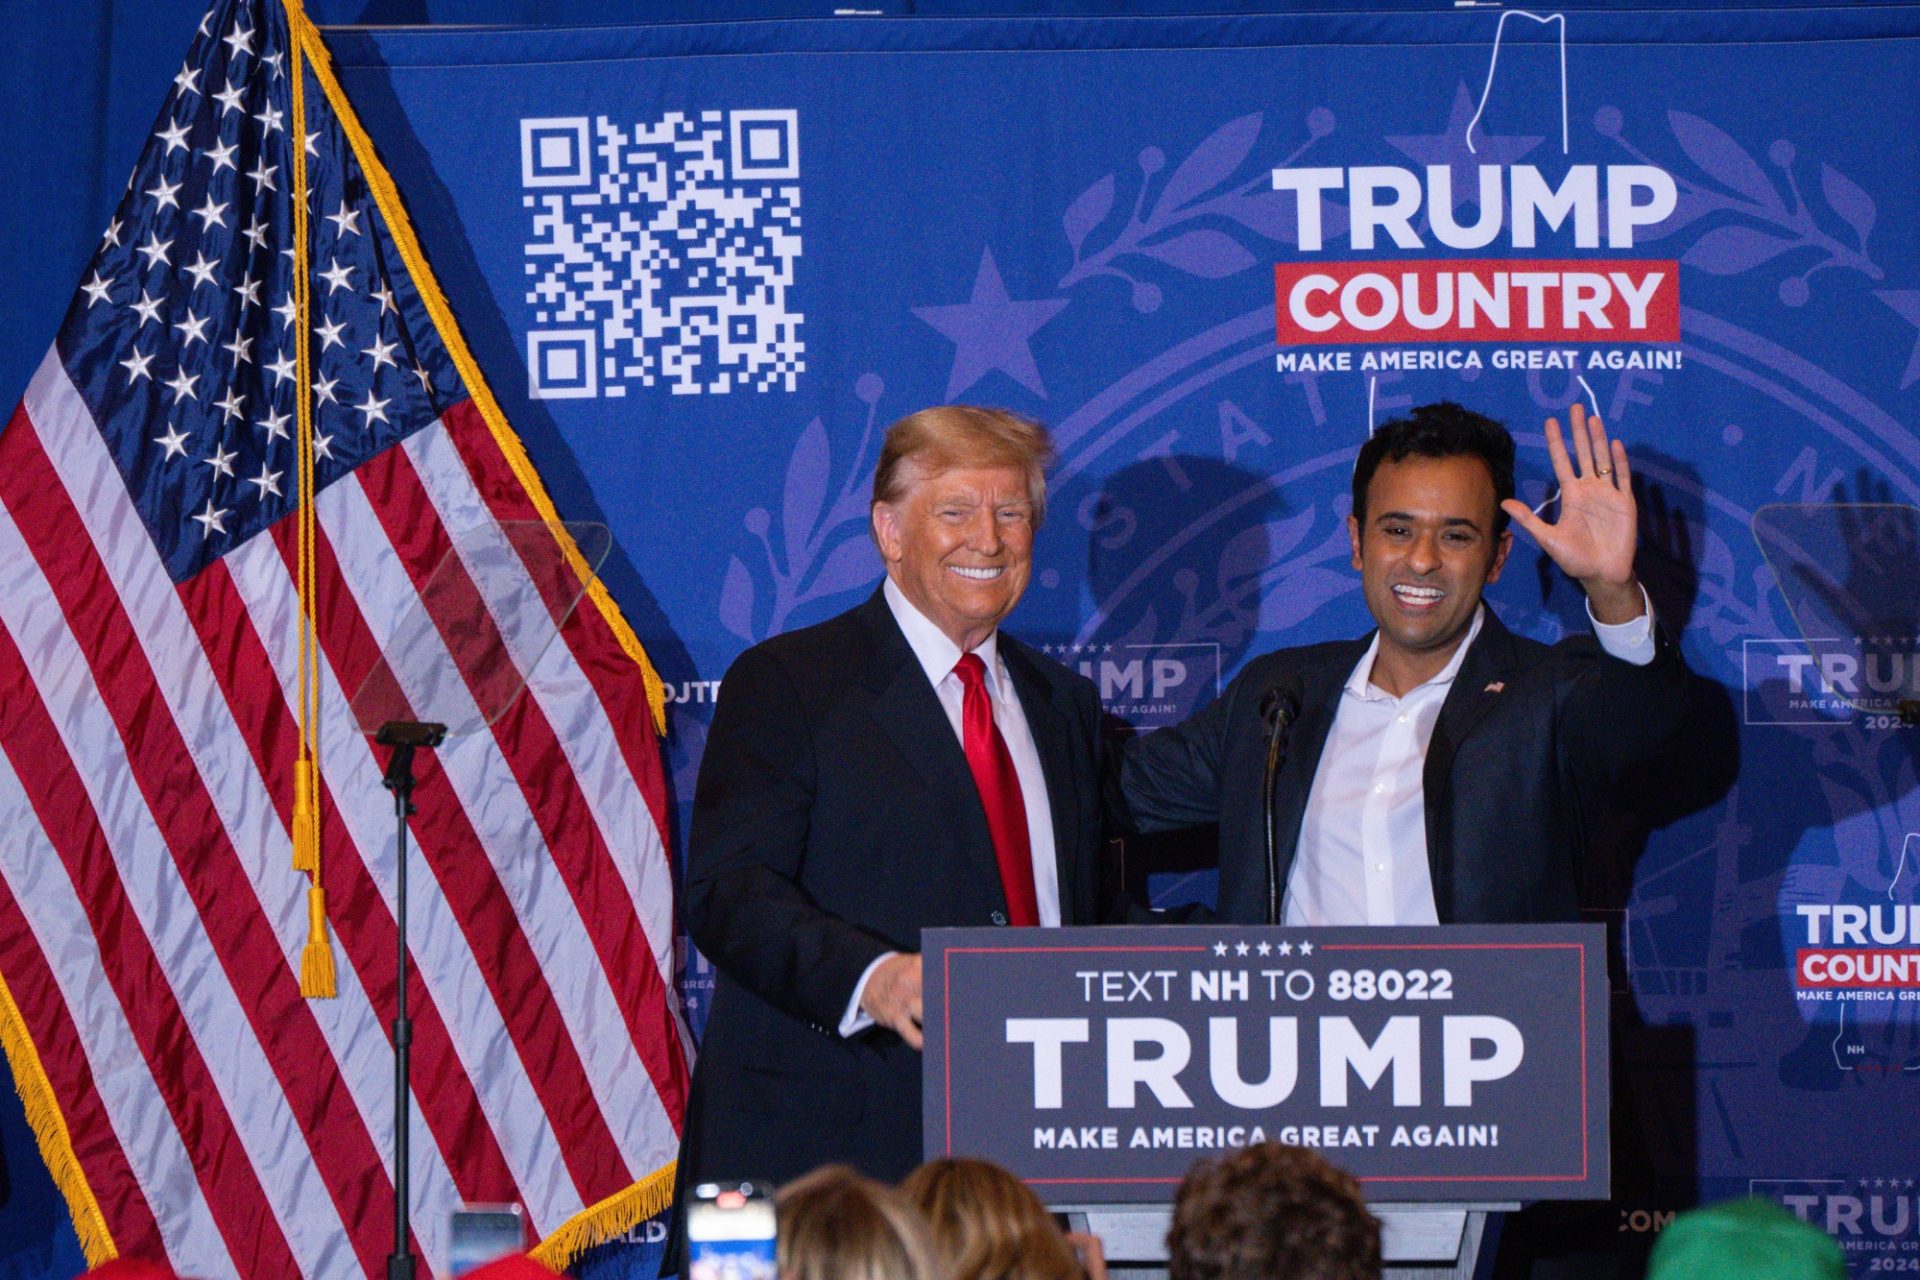 Vivek Ramaswamy Withdraws from 2024 Presidential Race After Iowa and Endorses Trump, Continent Times, Inc